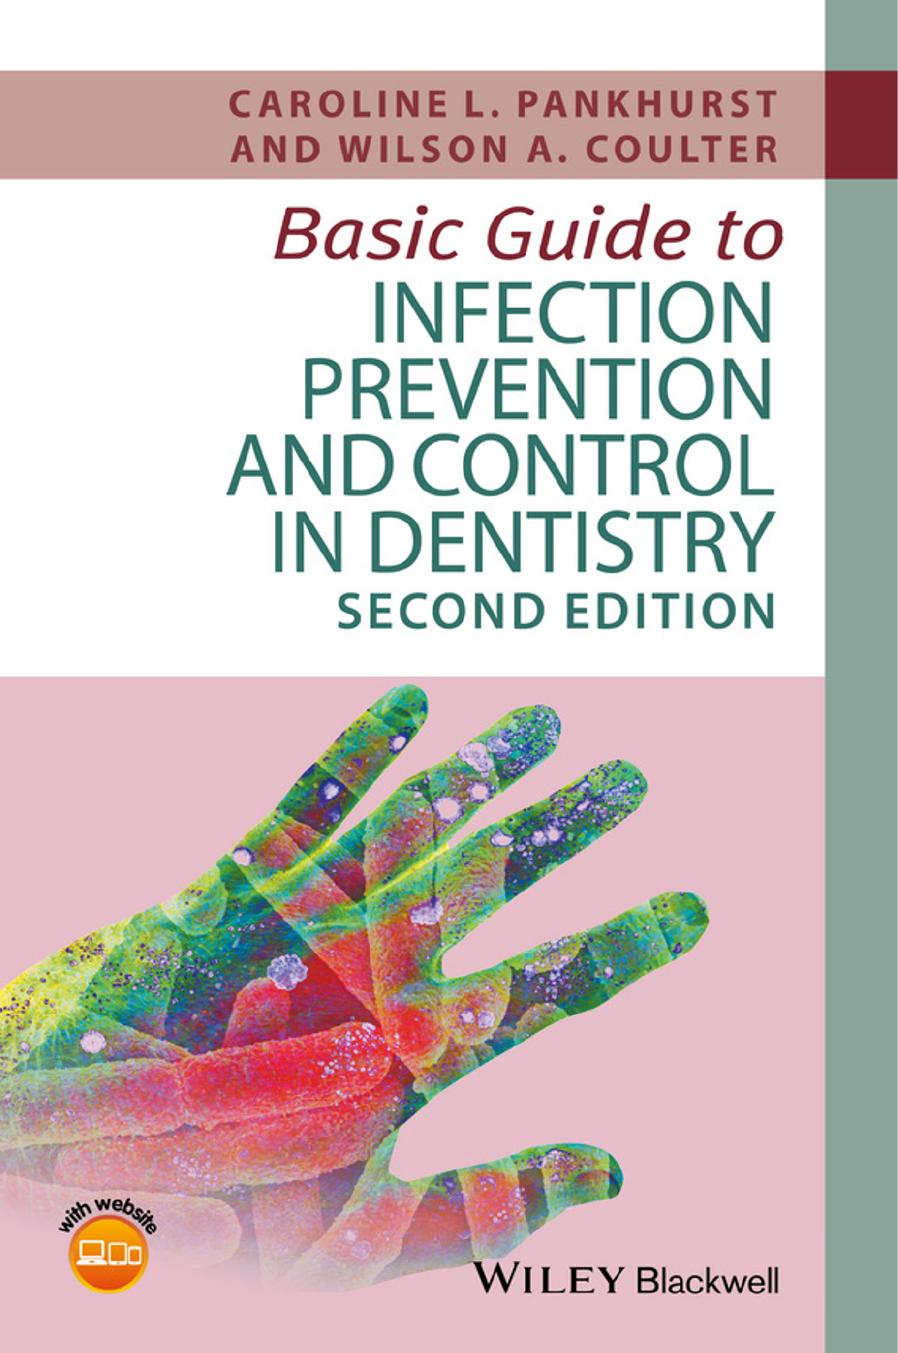 Basic Guide to: Infection Prevention and Control in Dentistry